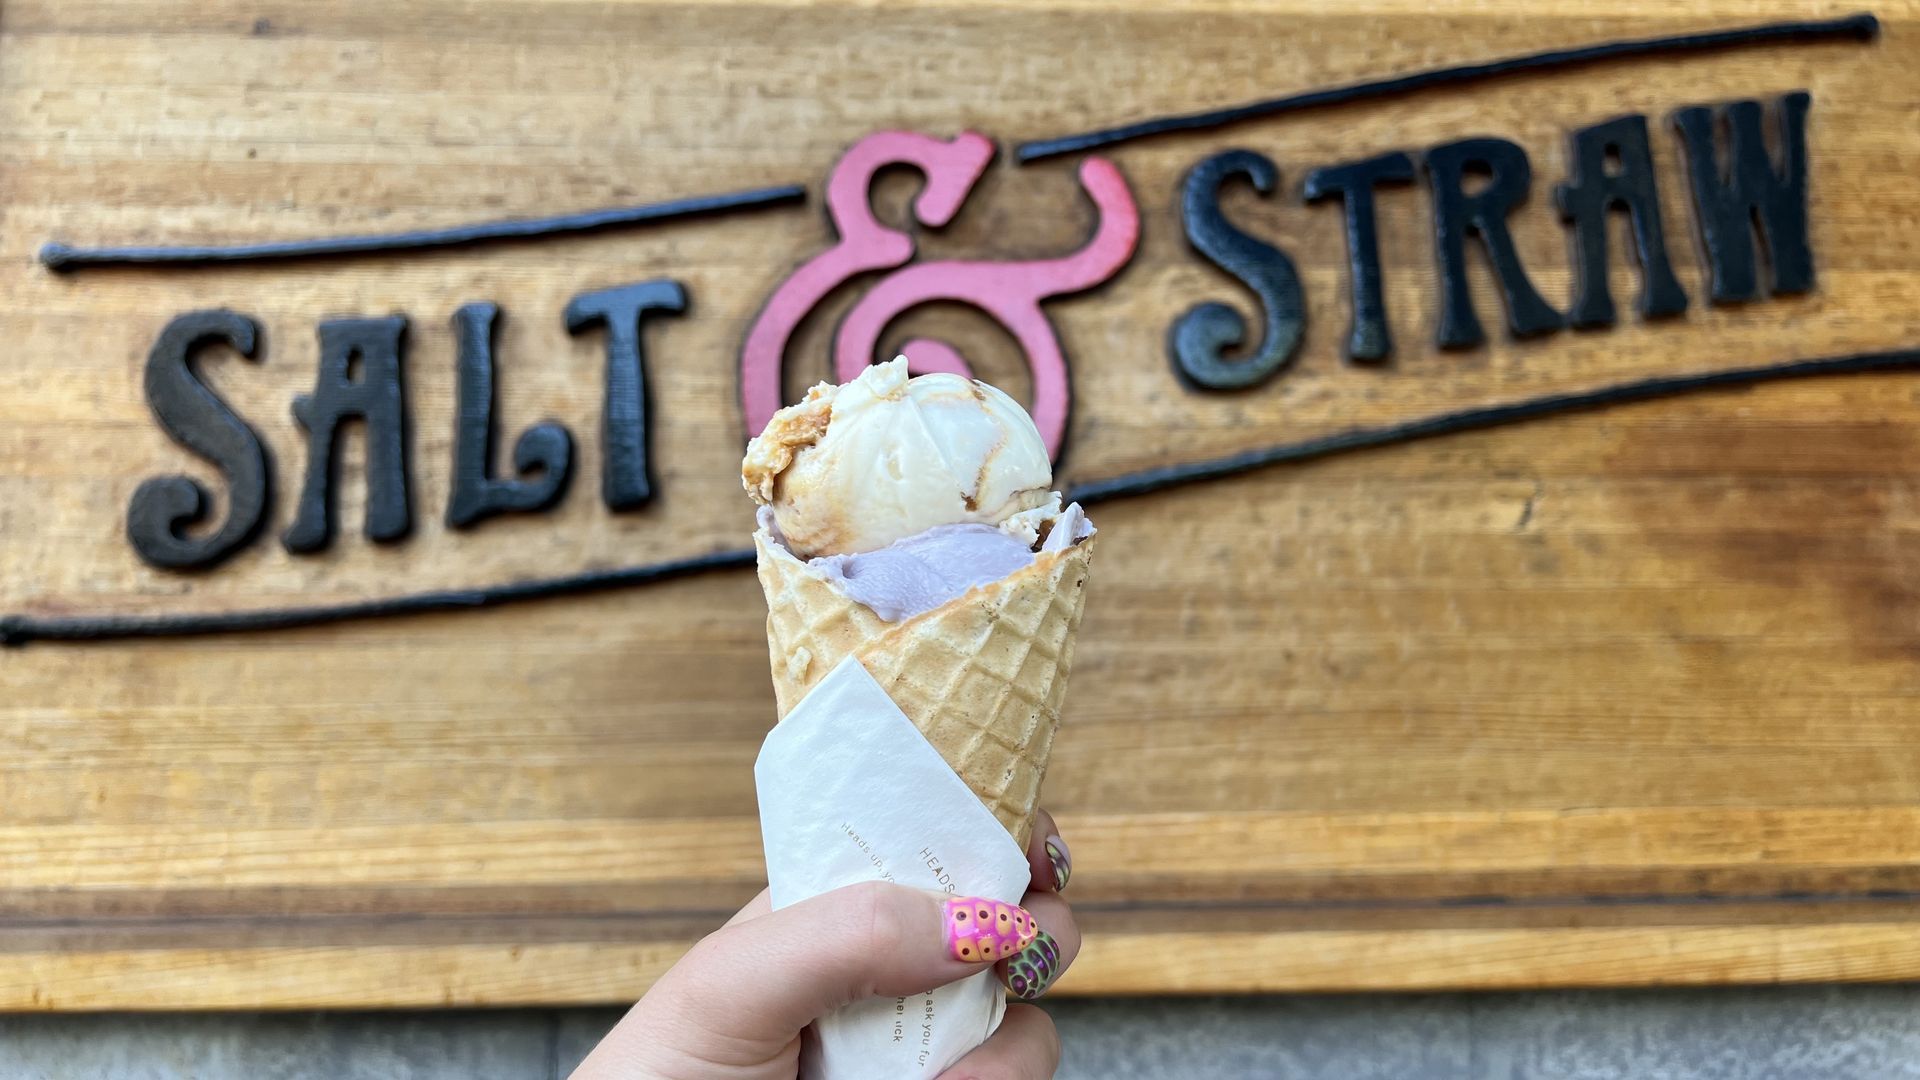 An image of a hand holding up an ice cream cone with the words Salt and Straw on a wooden board in the background.